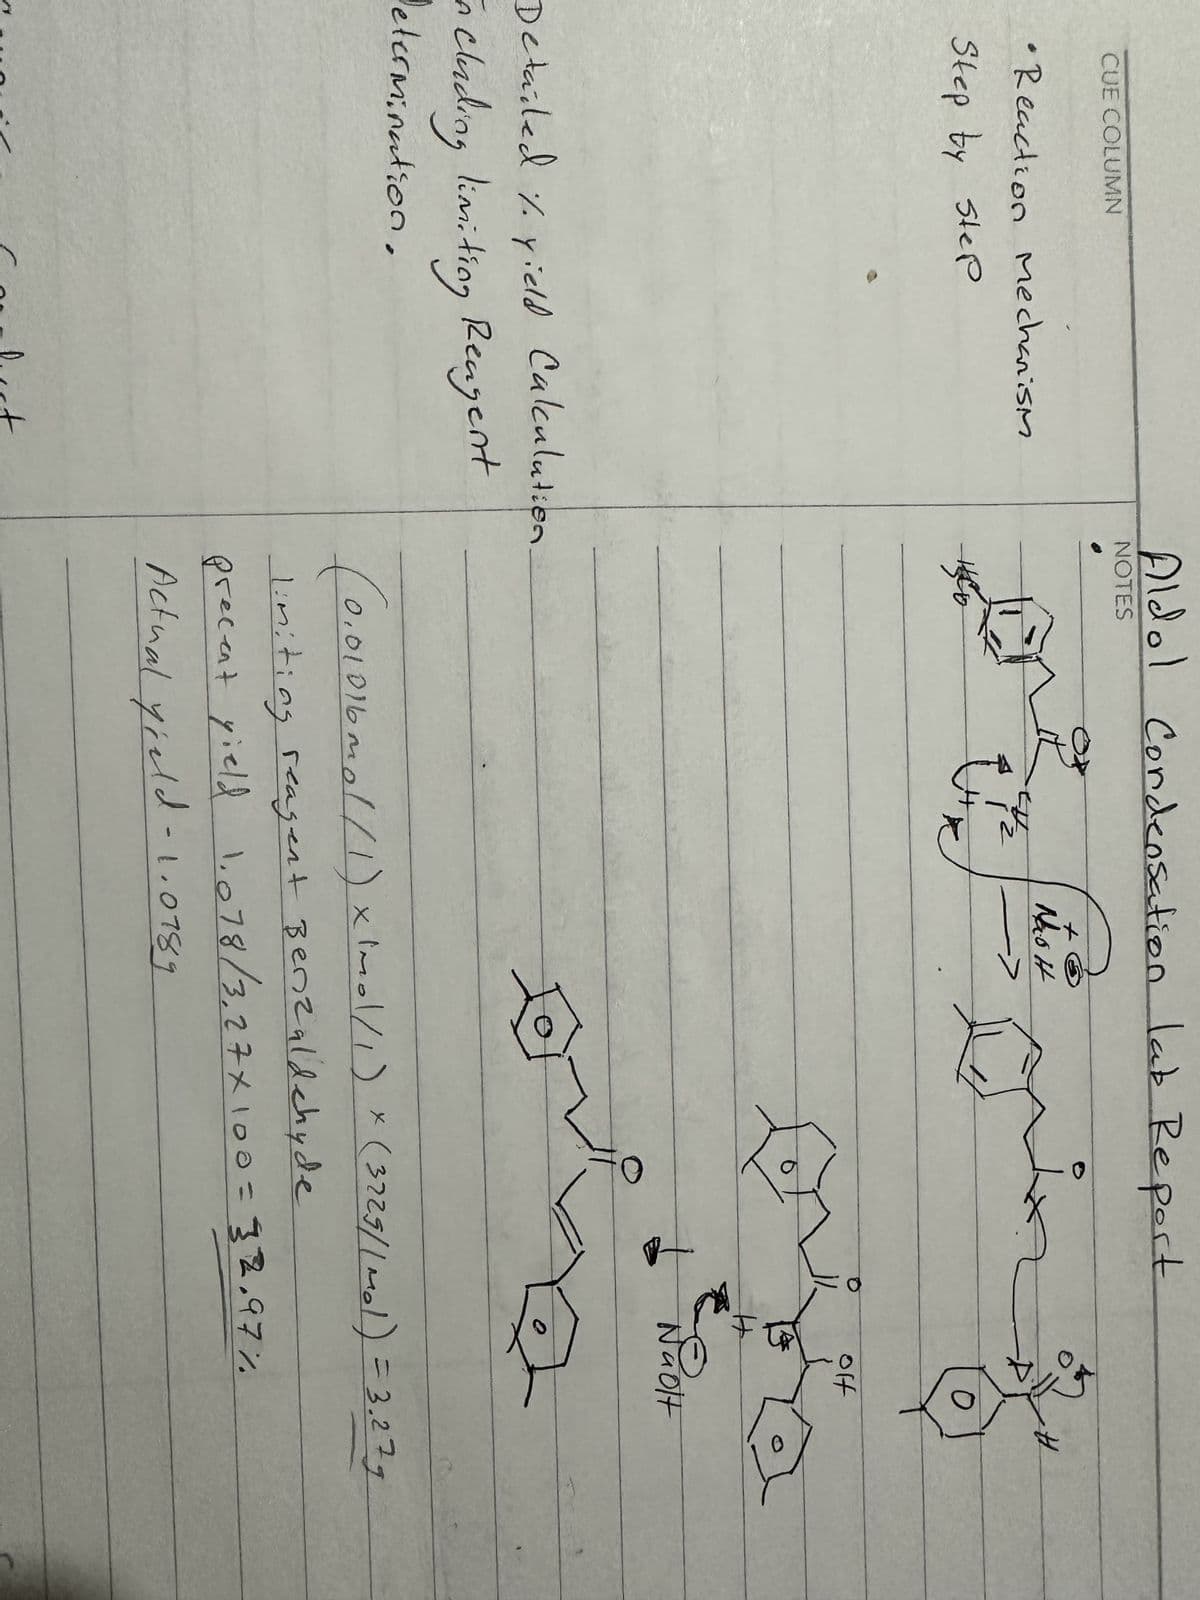 CUE COLUMN
• Reaction Mechanism
Step by Step
Aldol Condensation lab Report
NOTES
Detailed //. yield Calculation.
in clerding limiting Reagent
Determination.
Coreluct
47/2
q
Vixe
+
Nao H
عشر
#
off
Naolt
Q
i
(0.01016mol /1) x mol/1) × (3225//mol) = 3.277
limiting reagent Benzaldehyde
precent yield 1.078/3,27×100=32,97%
Actual yield - 1.0789
8